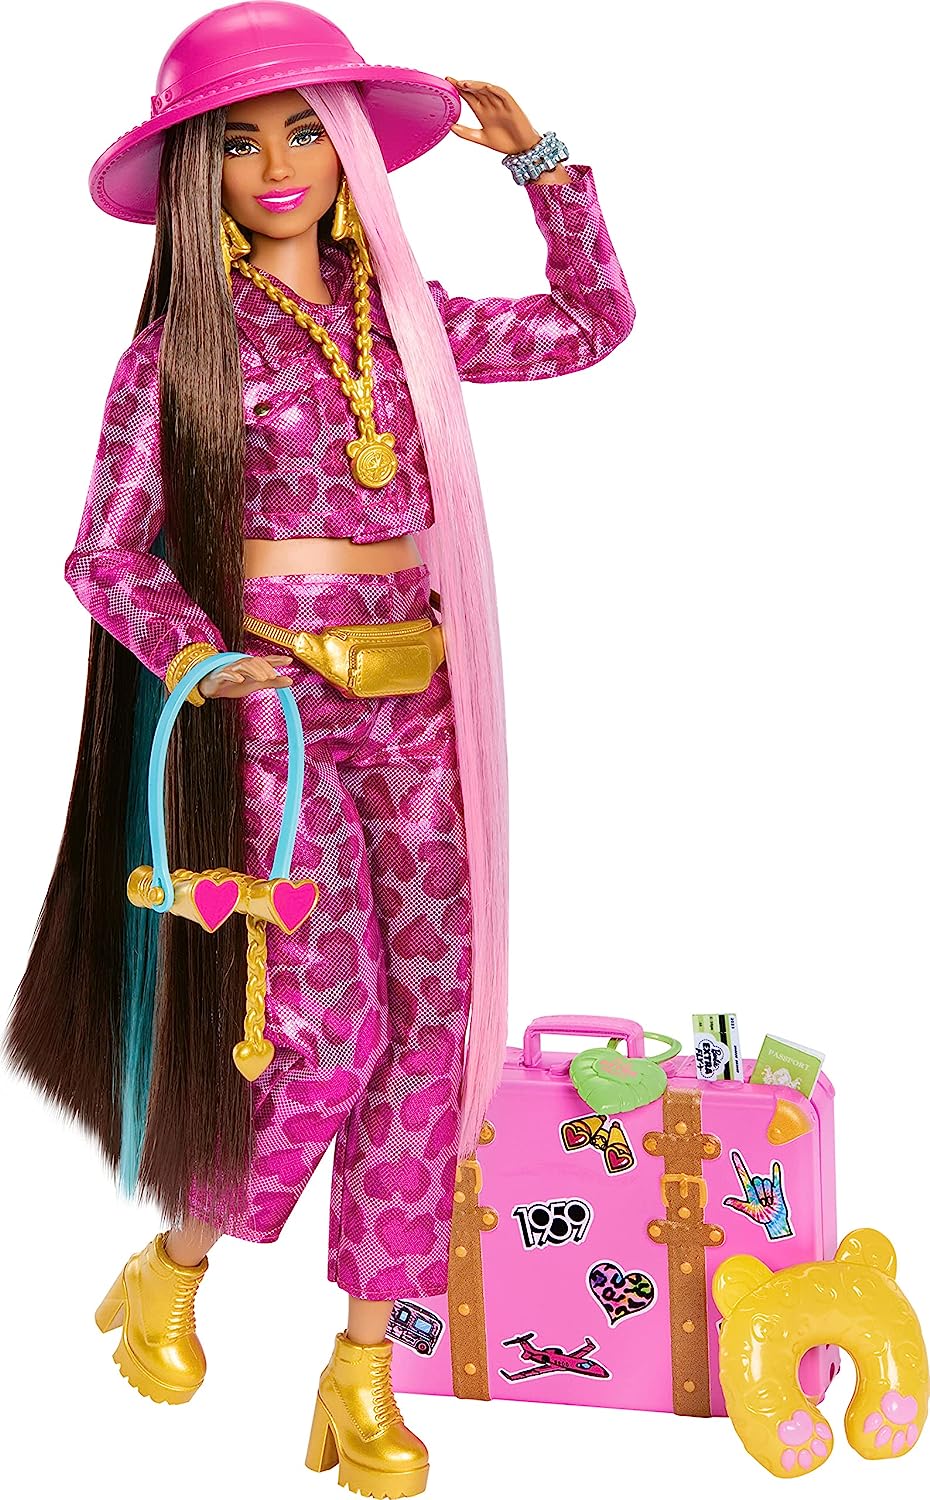 Barbie Extra Fly Travel Doll w/ Colorful Hair, Pink Camo Outfit, Golden Boots & Accessorie $15 + Free Shipping w/ Prime or on $35+